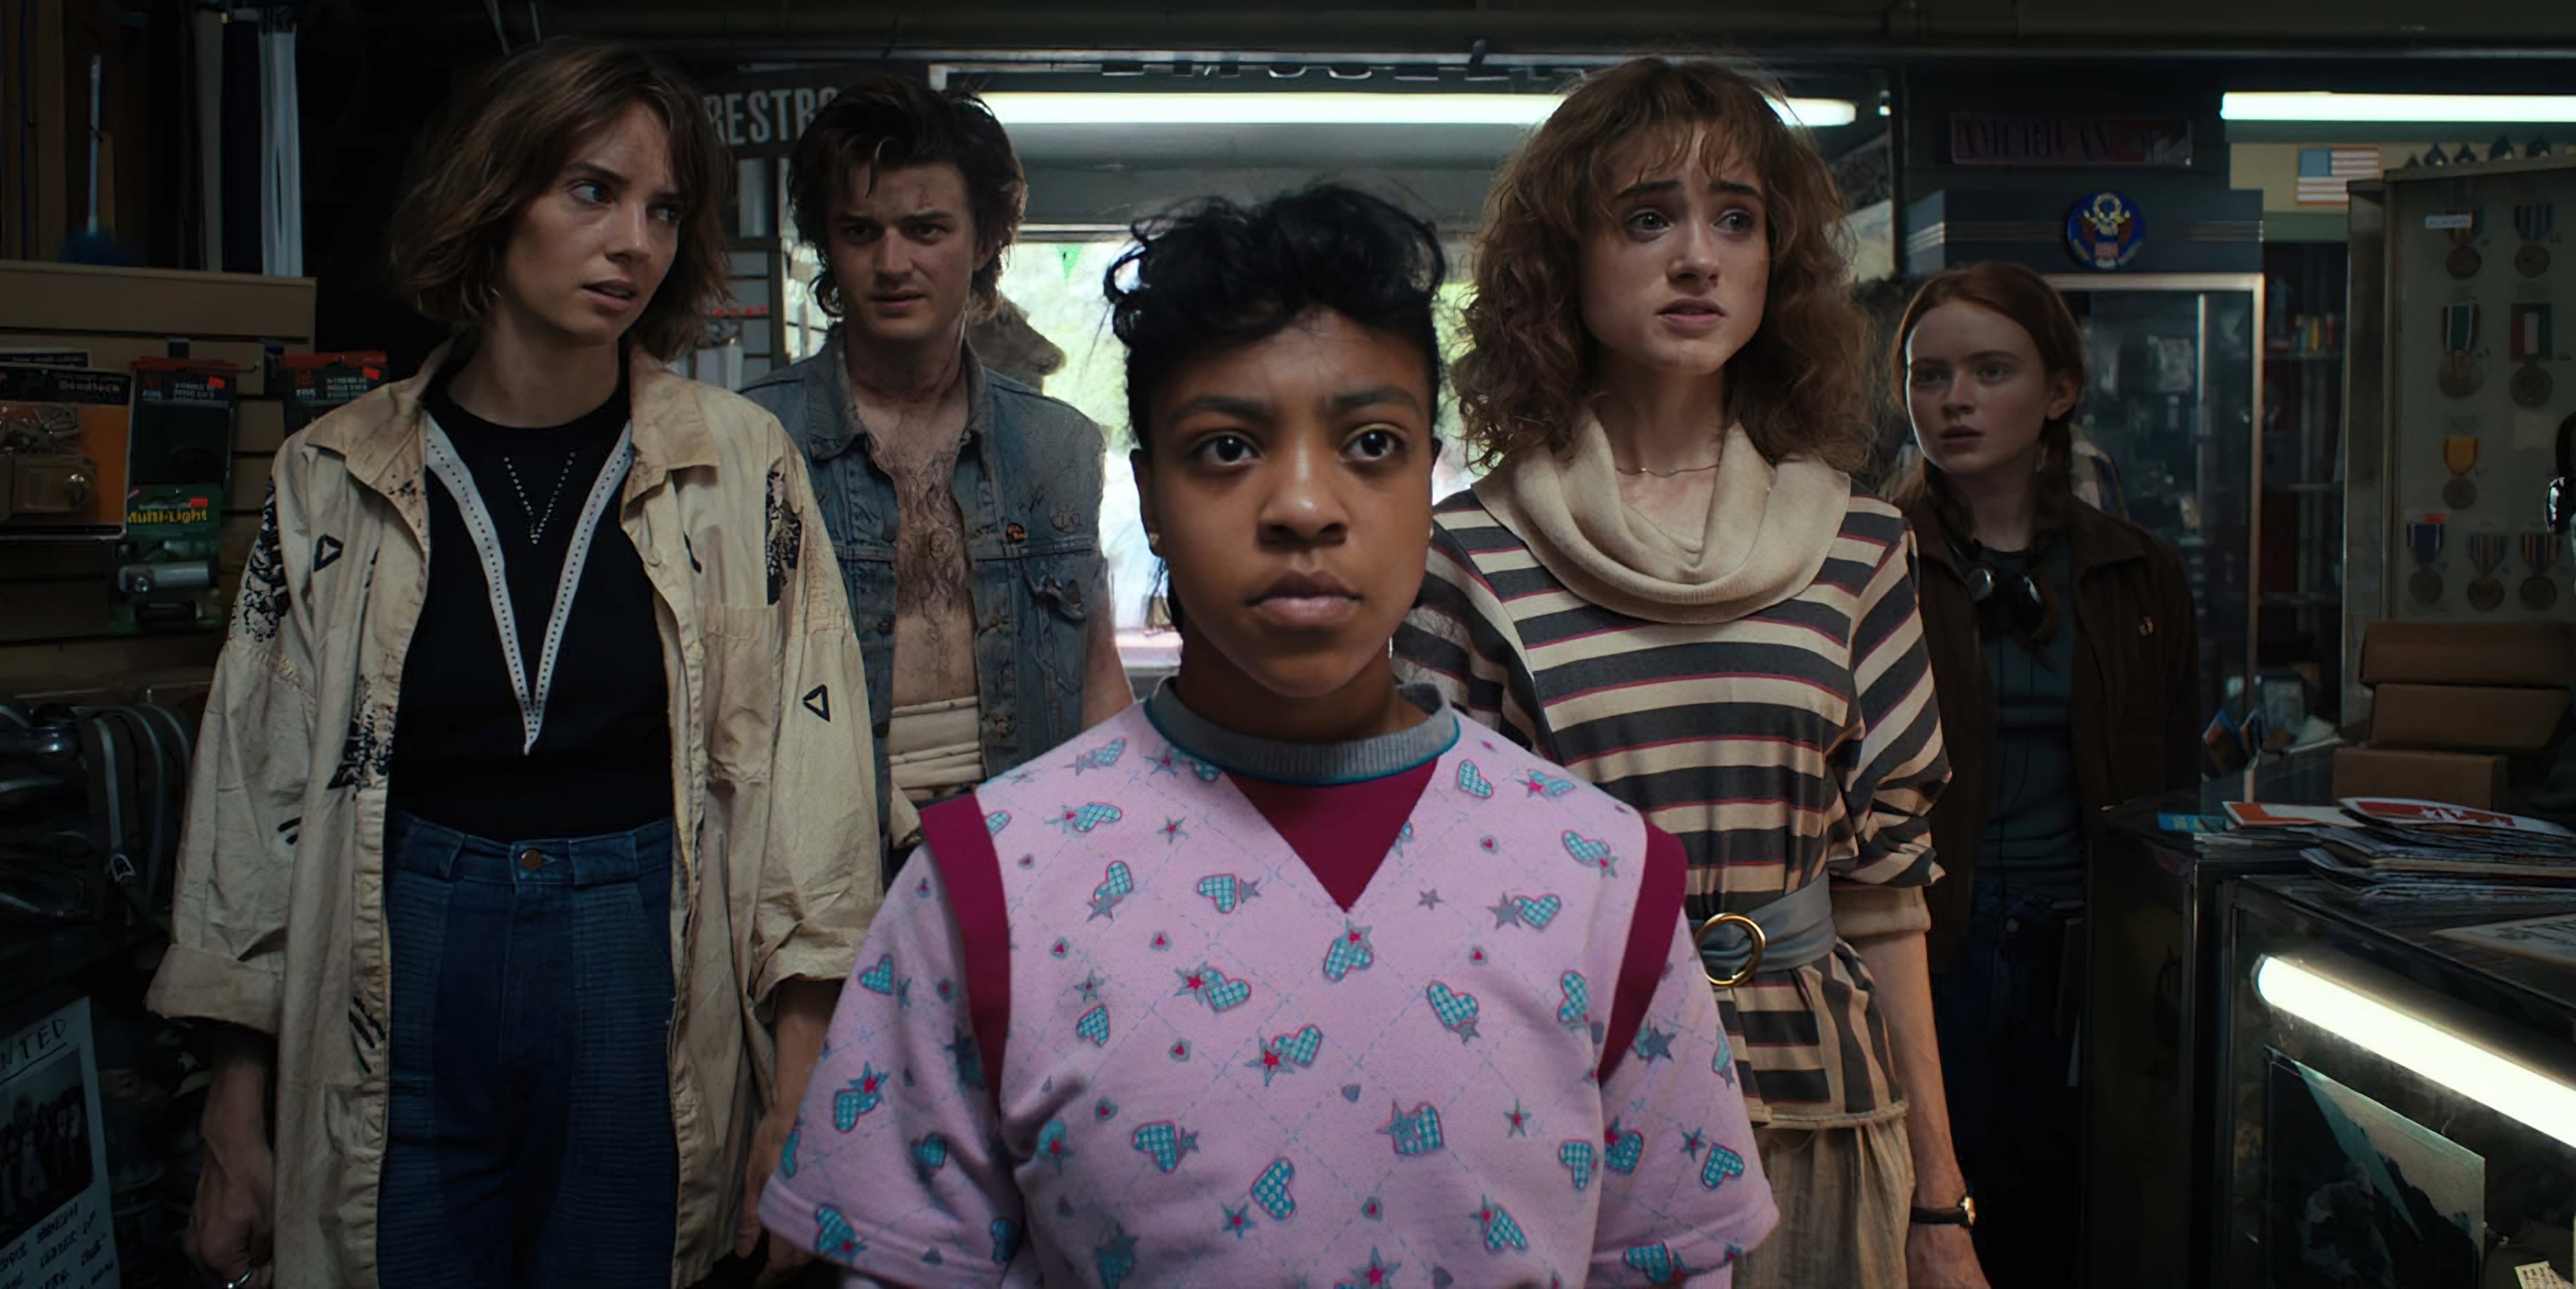 The Stranger Things Season 4 Premiere Title Could Have A Marvel